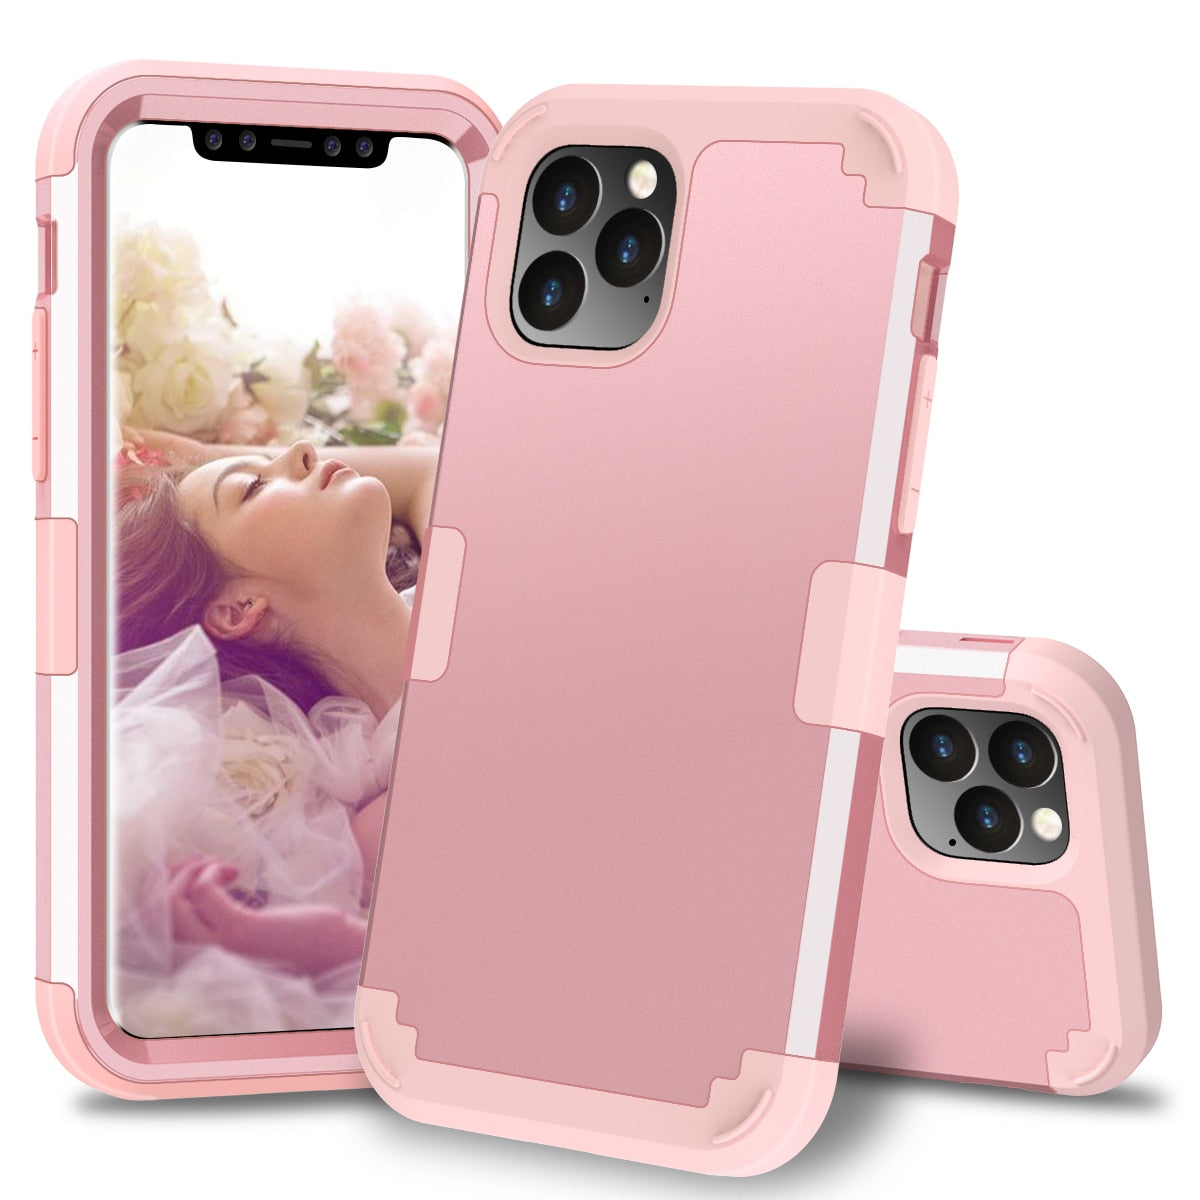 For Apple iPhone 11 2019 Case Shockproof Protect Hybrid Hard Rubber Impact Armor Phone Cases For iPhone 11 2019 Cover - 380230 for iPhone X XS / Rose / United States Find Epic Store